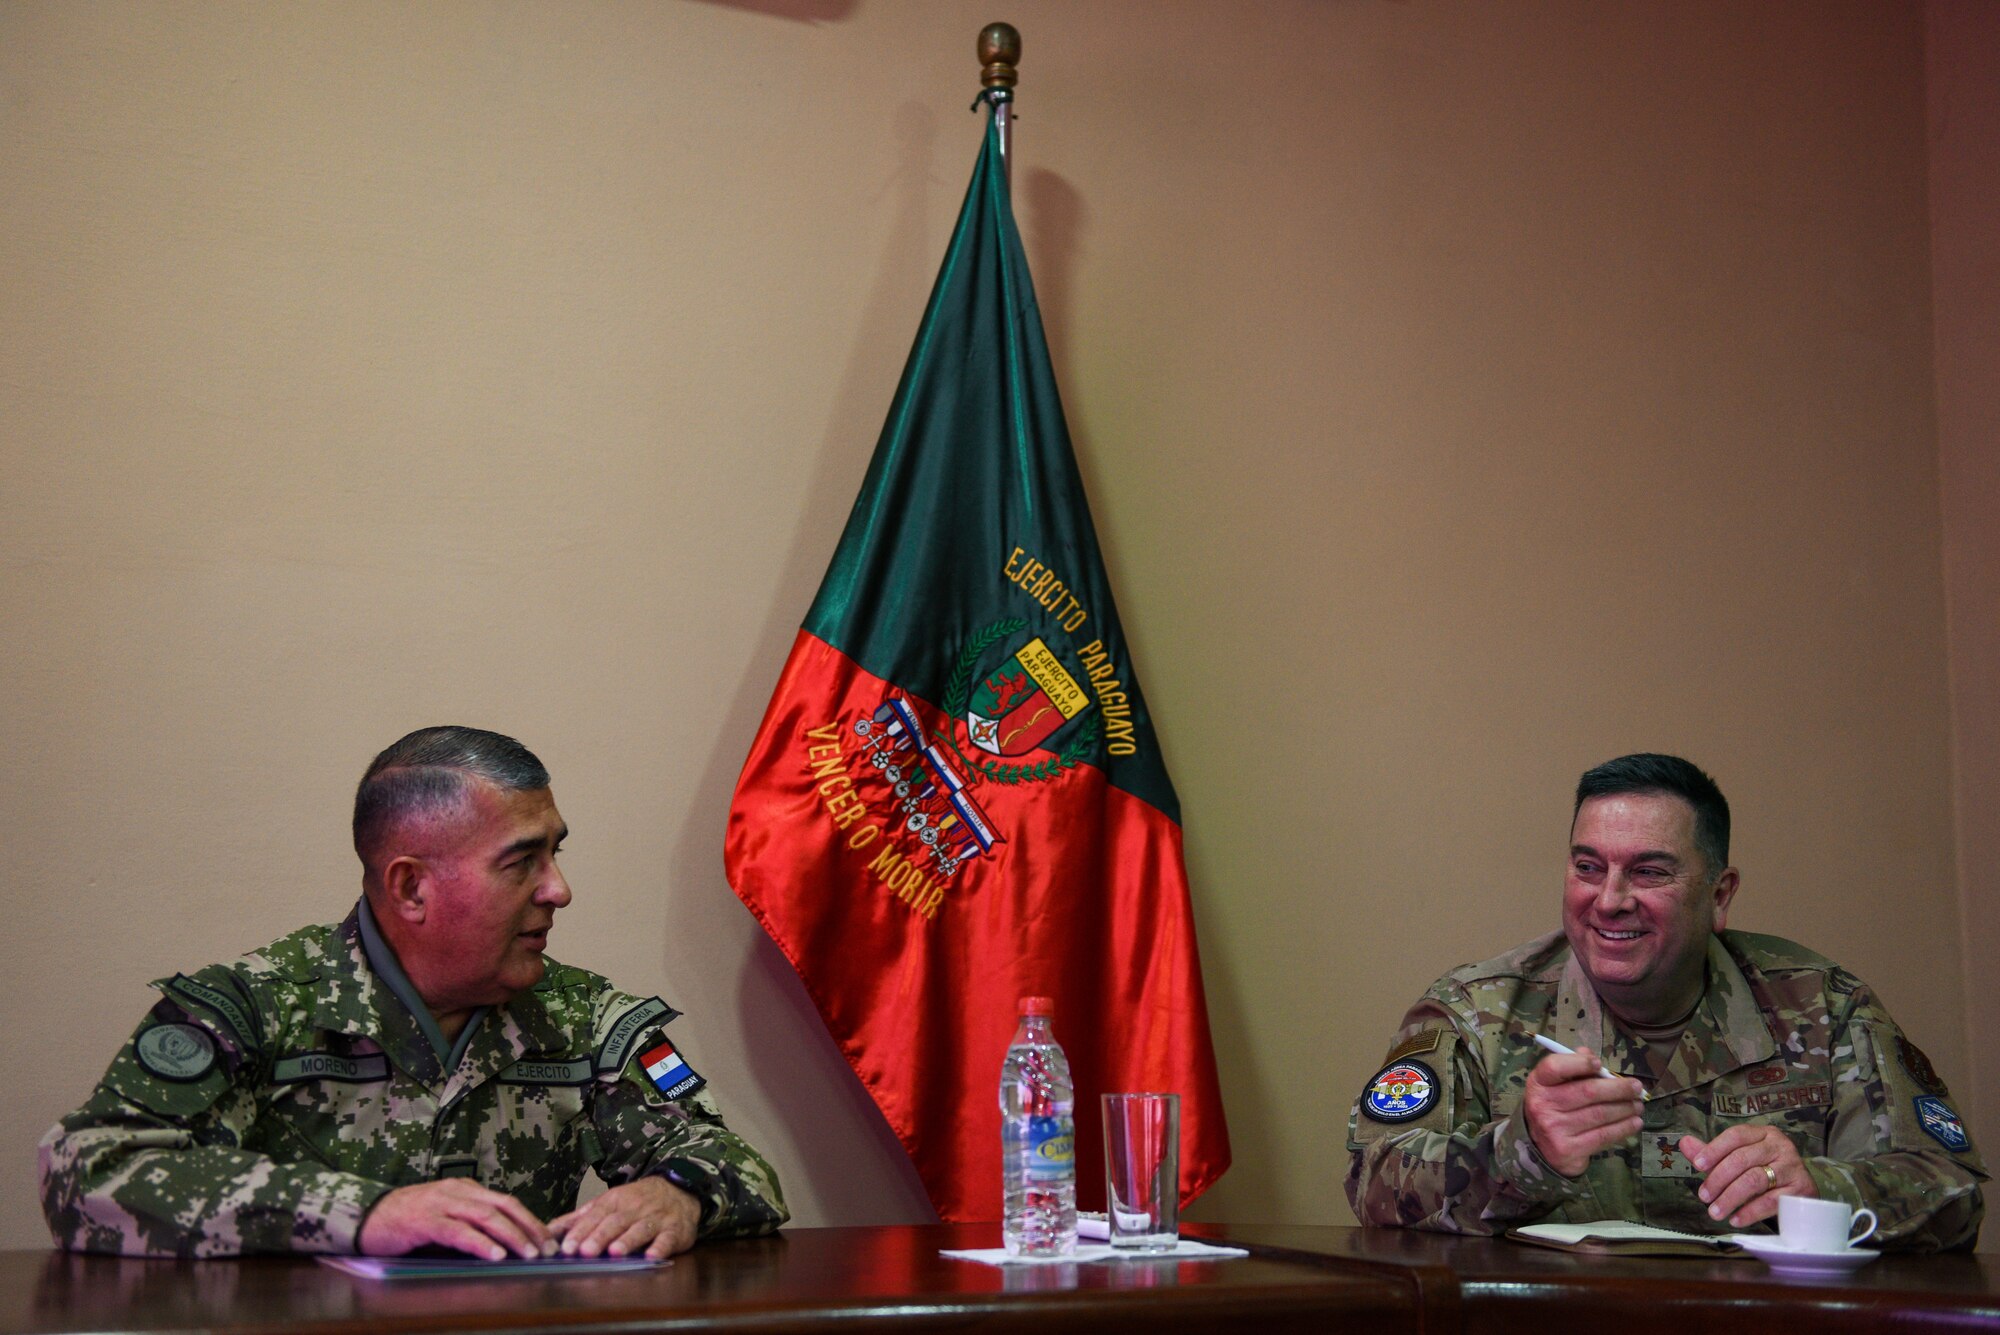 U.S. Air Force Maj. Gen. Gary Keefe, the adjutant general of Massachusetts, speaks with Paraguayan army Gen. Cesar A. Moreno, the Paraguayan Army commander, during a State Partnership Program event in Asunción, Paraguay, May 18, 2023.